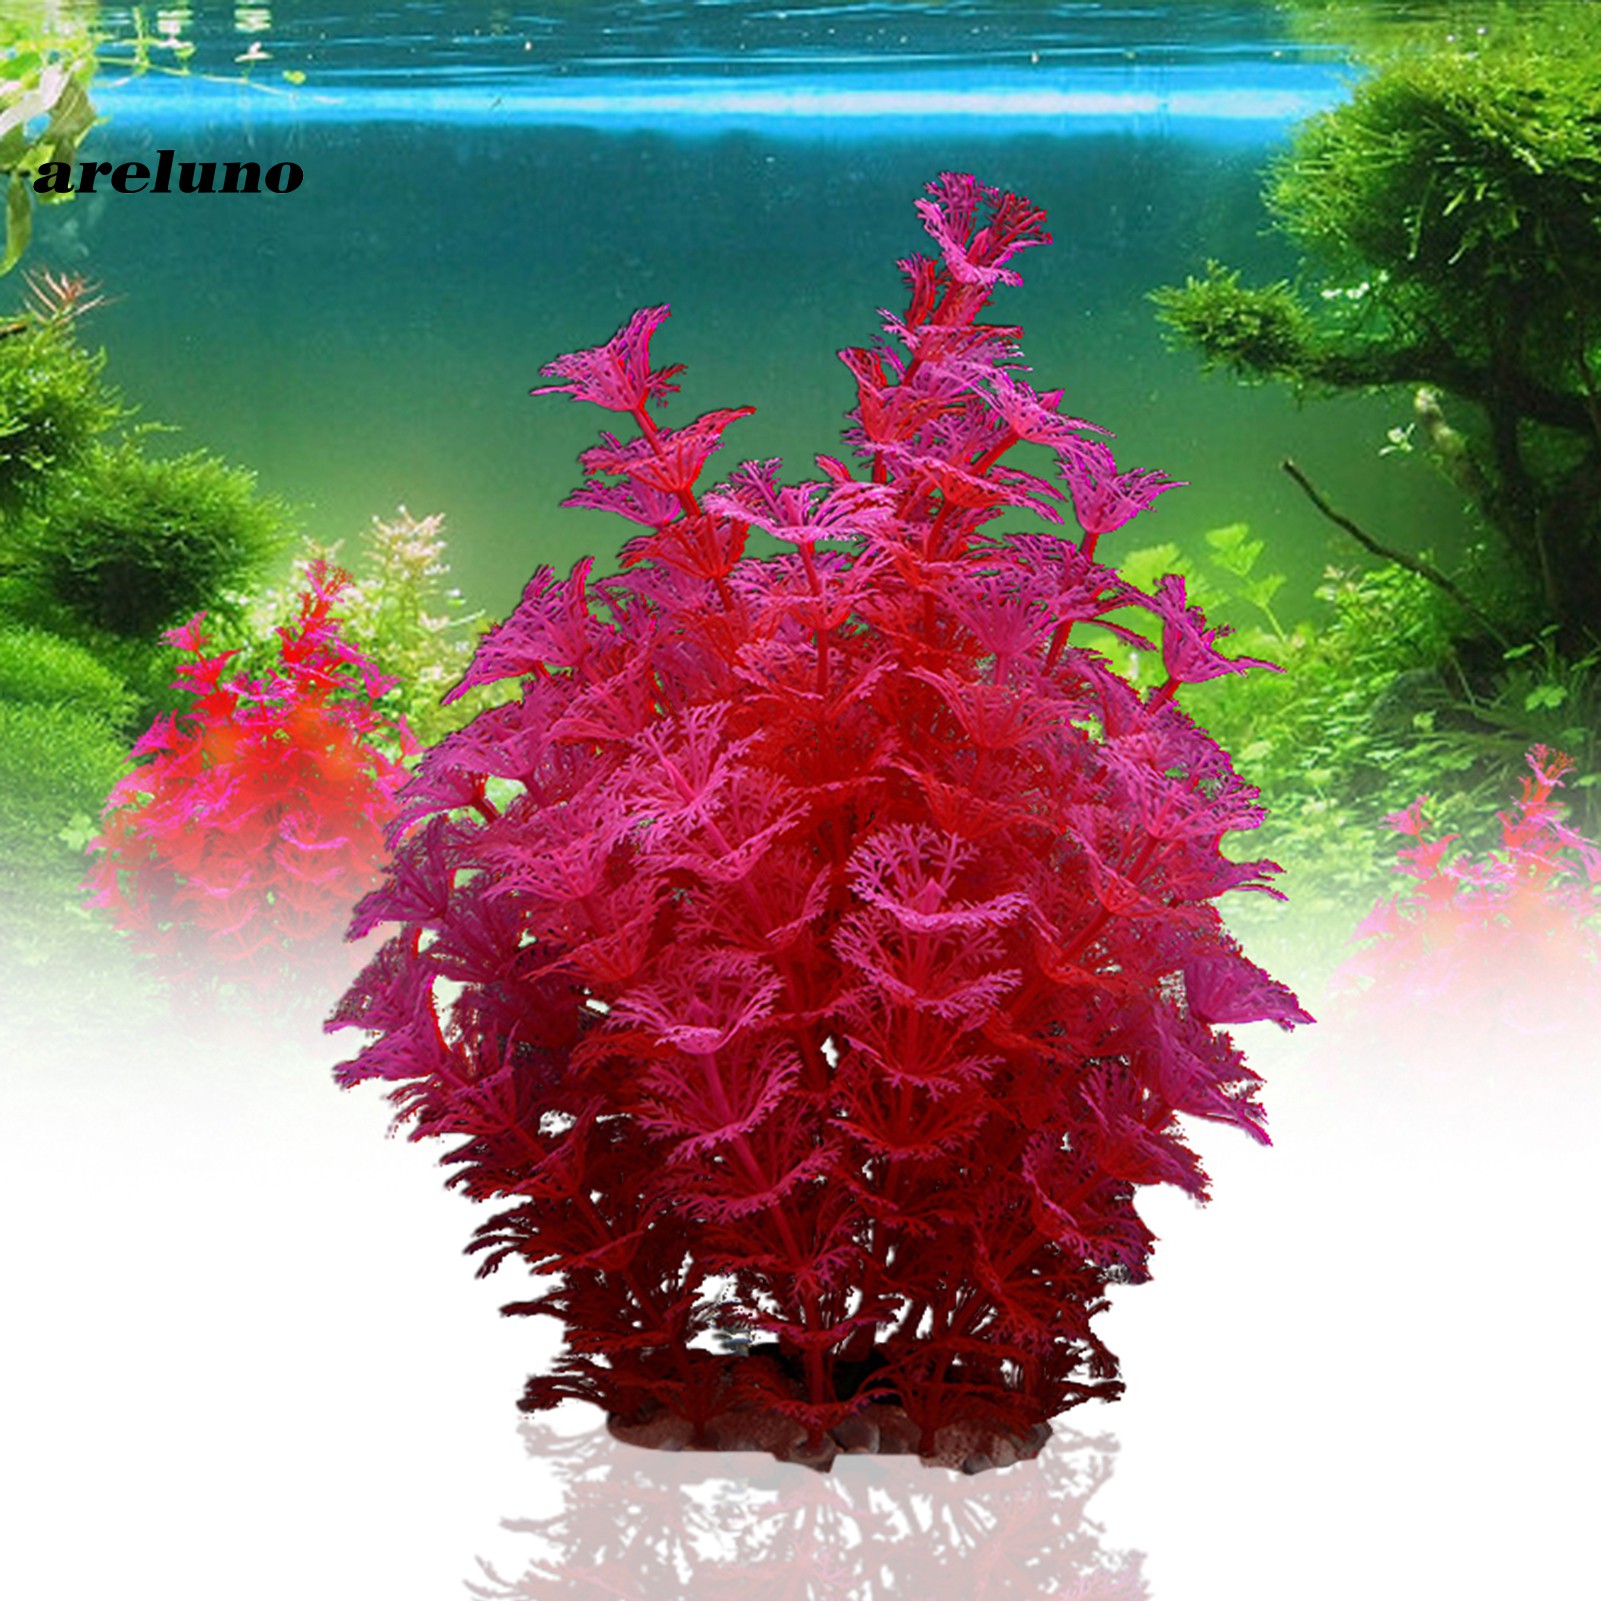 AREL Take care of the pet Good Toughness Fish Tank Decoration Decorative Scenery Plants Multifunctional for Home